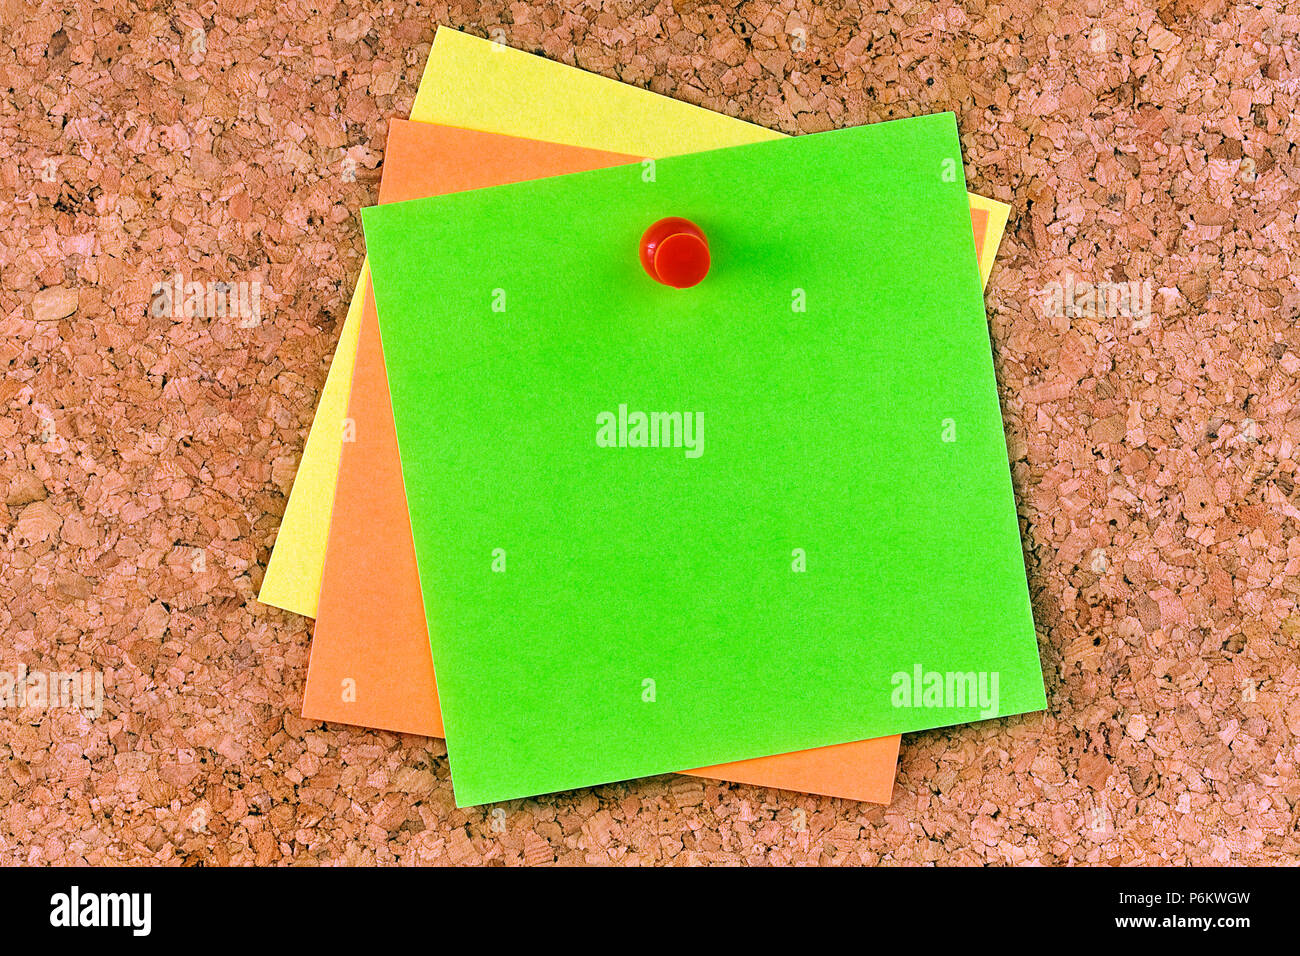 Stacked square blank postits affixed on cork board with red pushpin Stock Photo